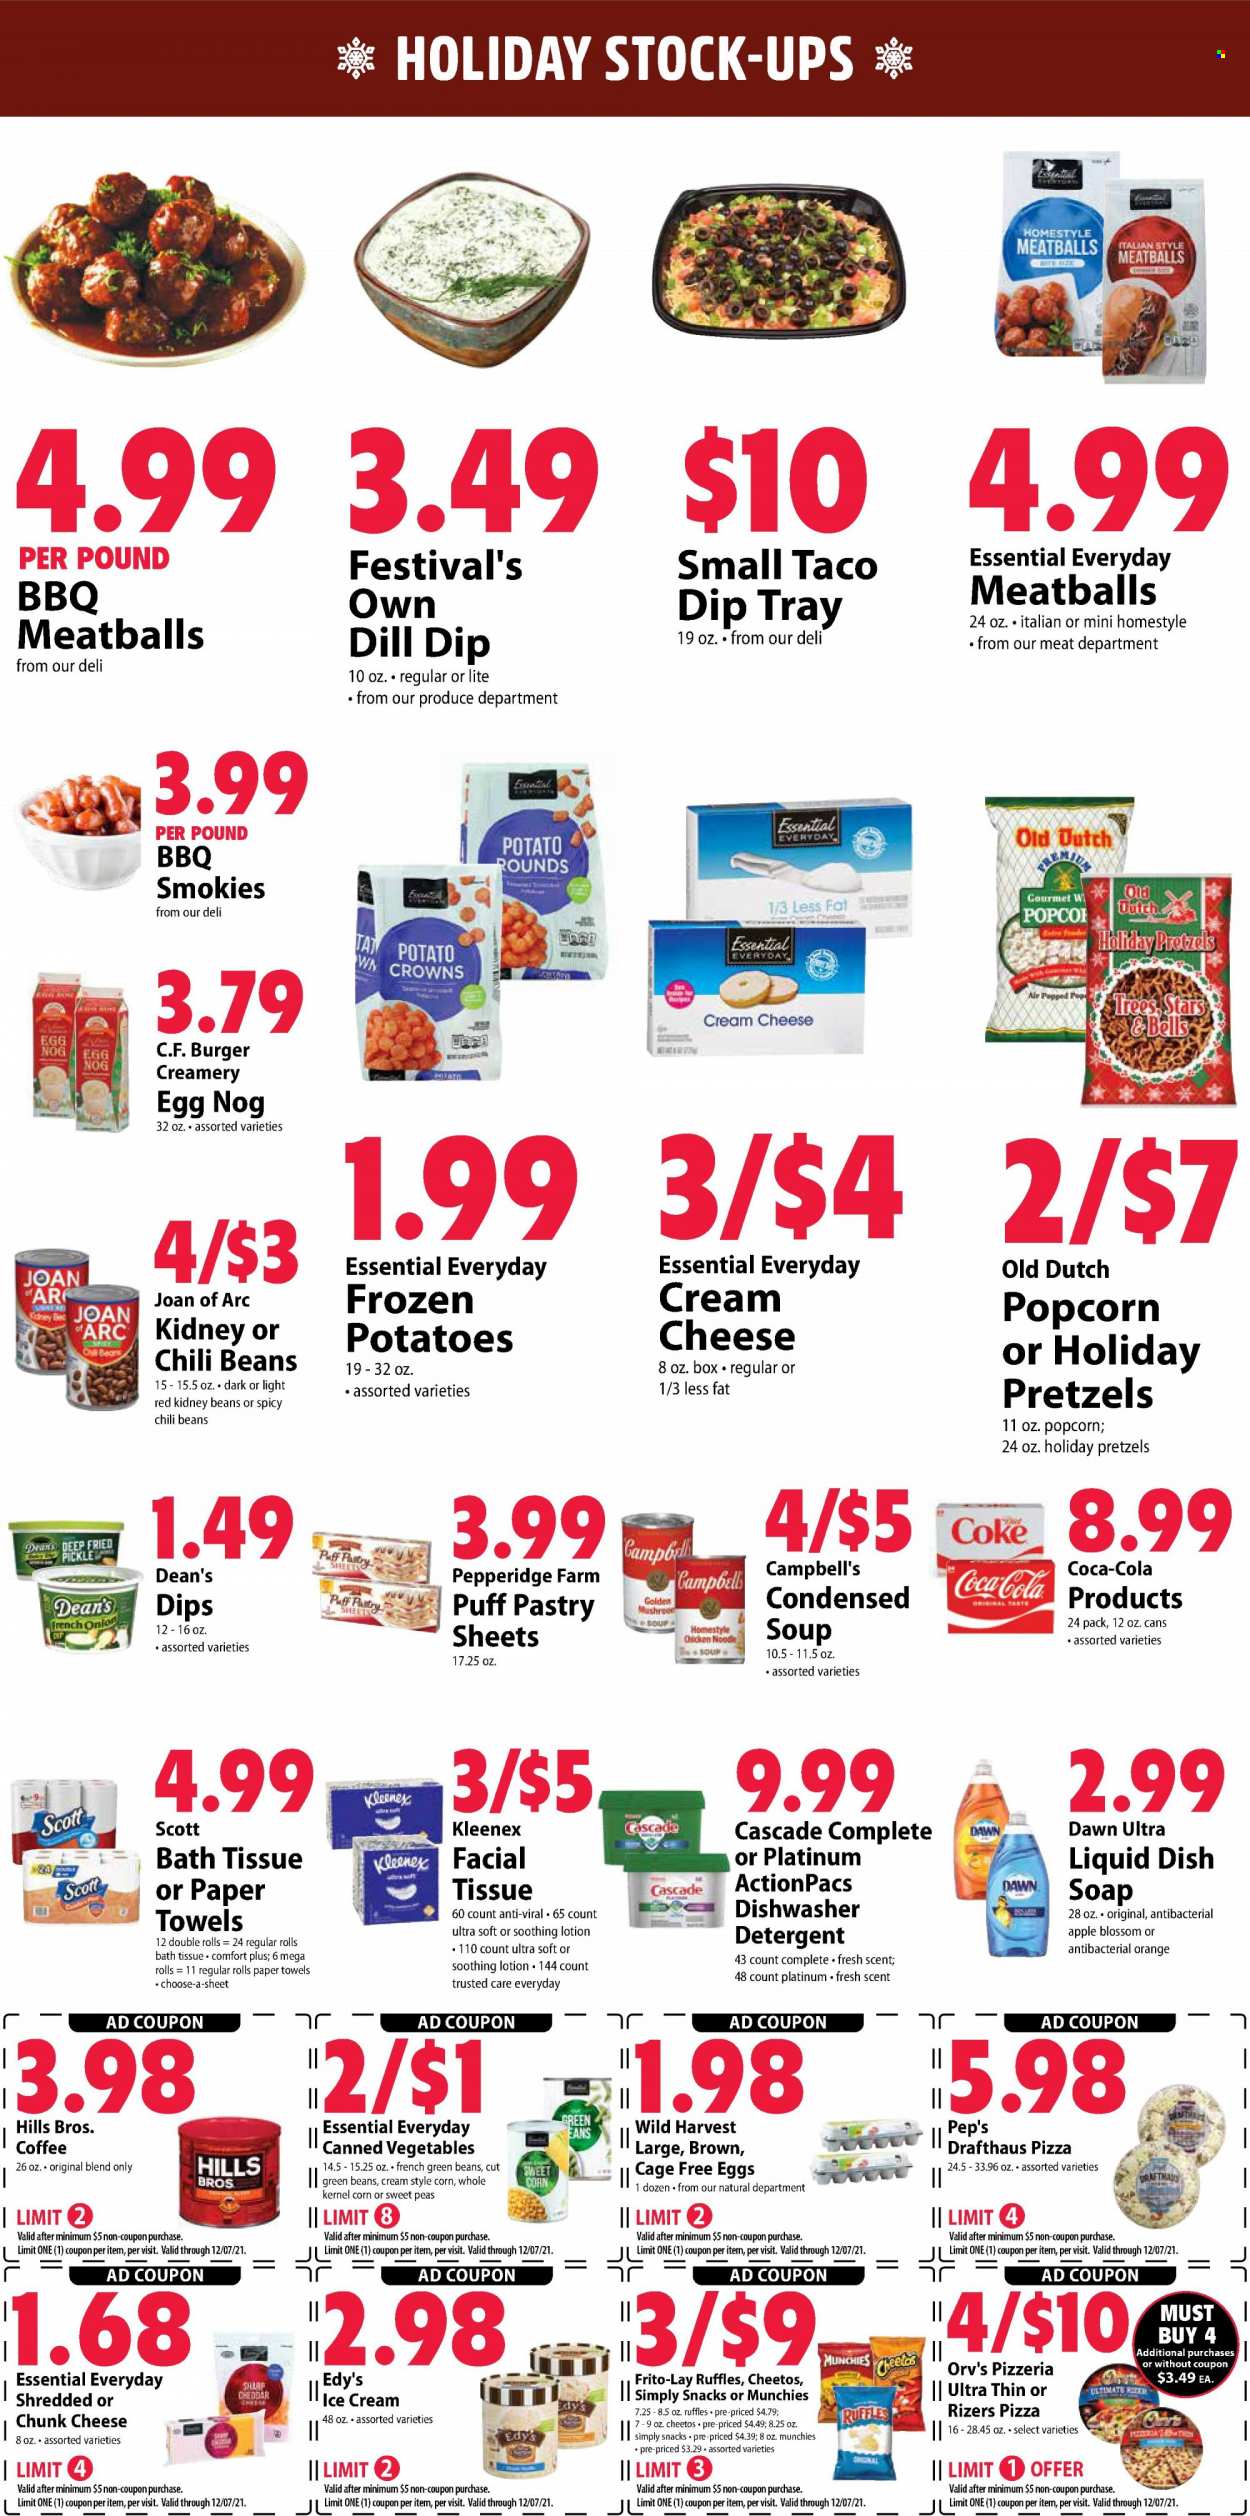 Festival Foods ad  - 12.01.2021 - 12.07.2021.